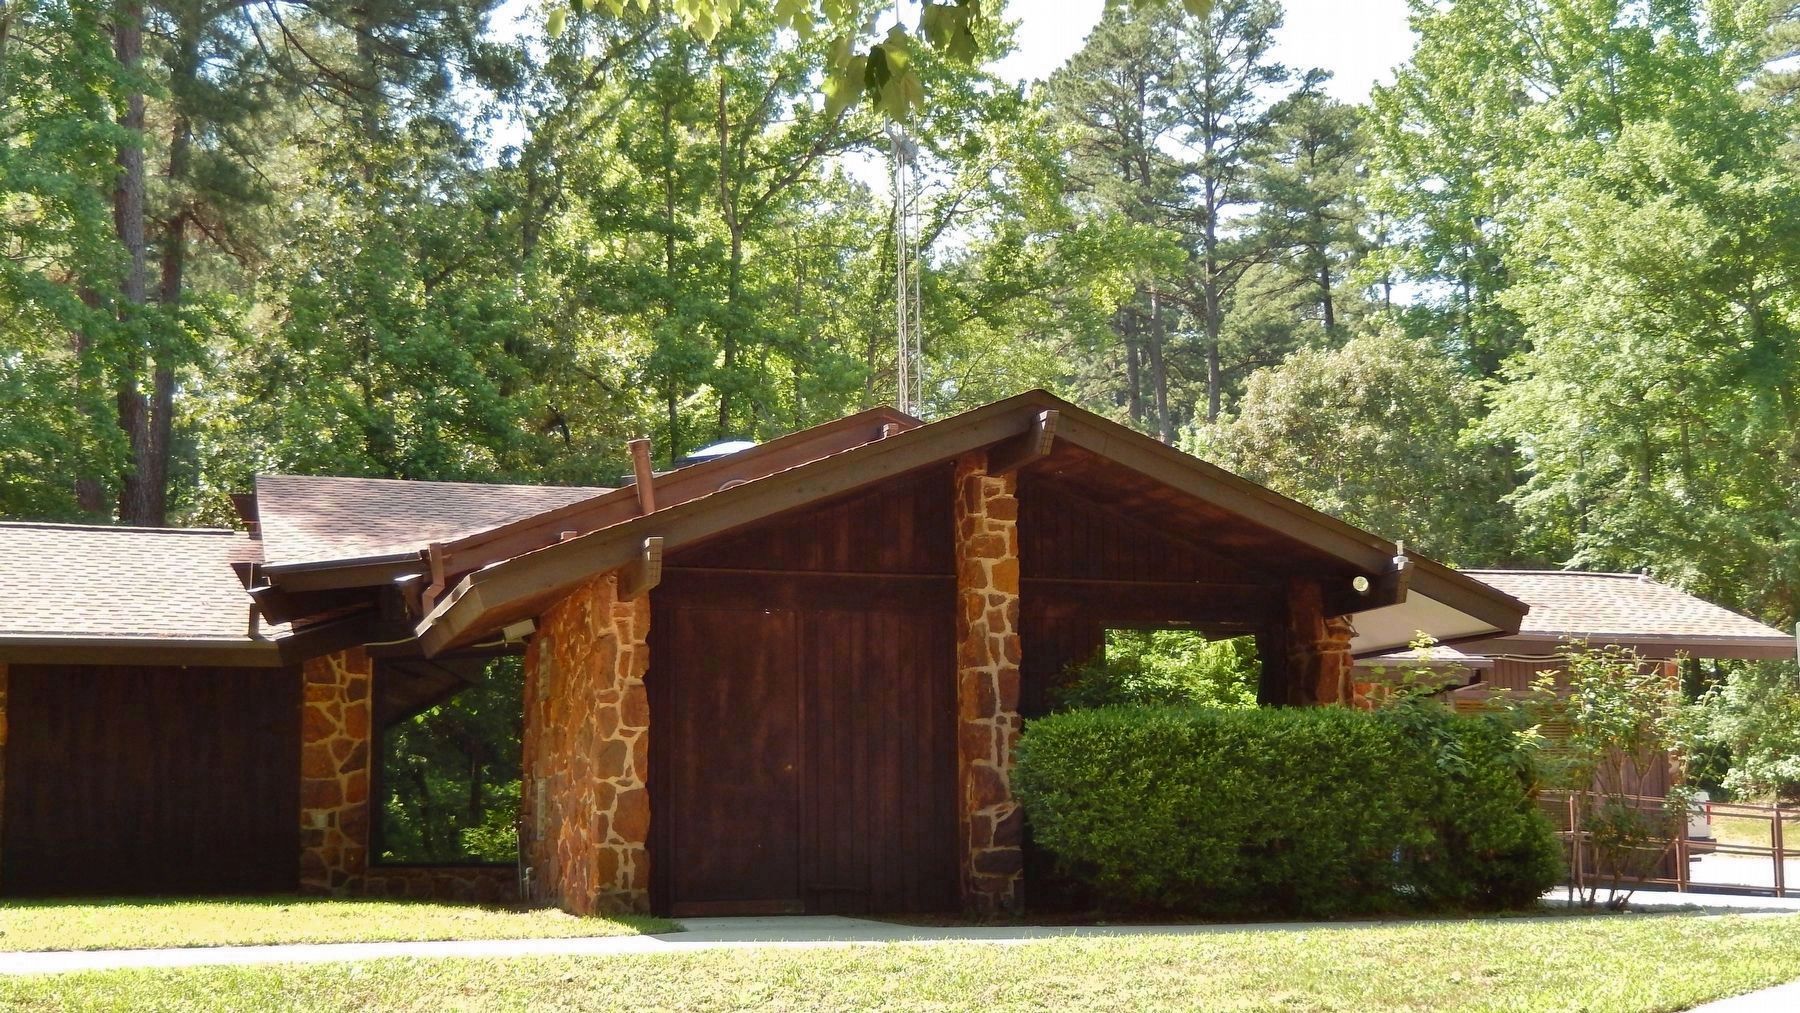 Caddo Lake State Park 1970 Headquarters and Interpretive Center image. Click for full size.